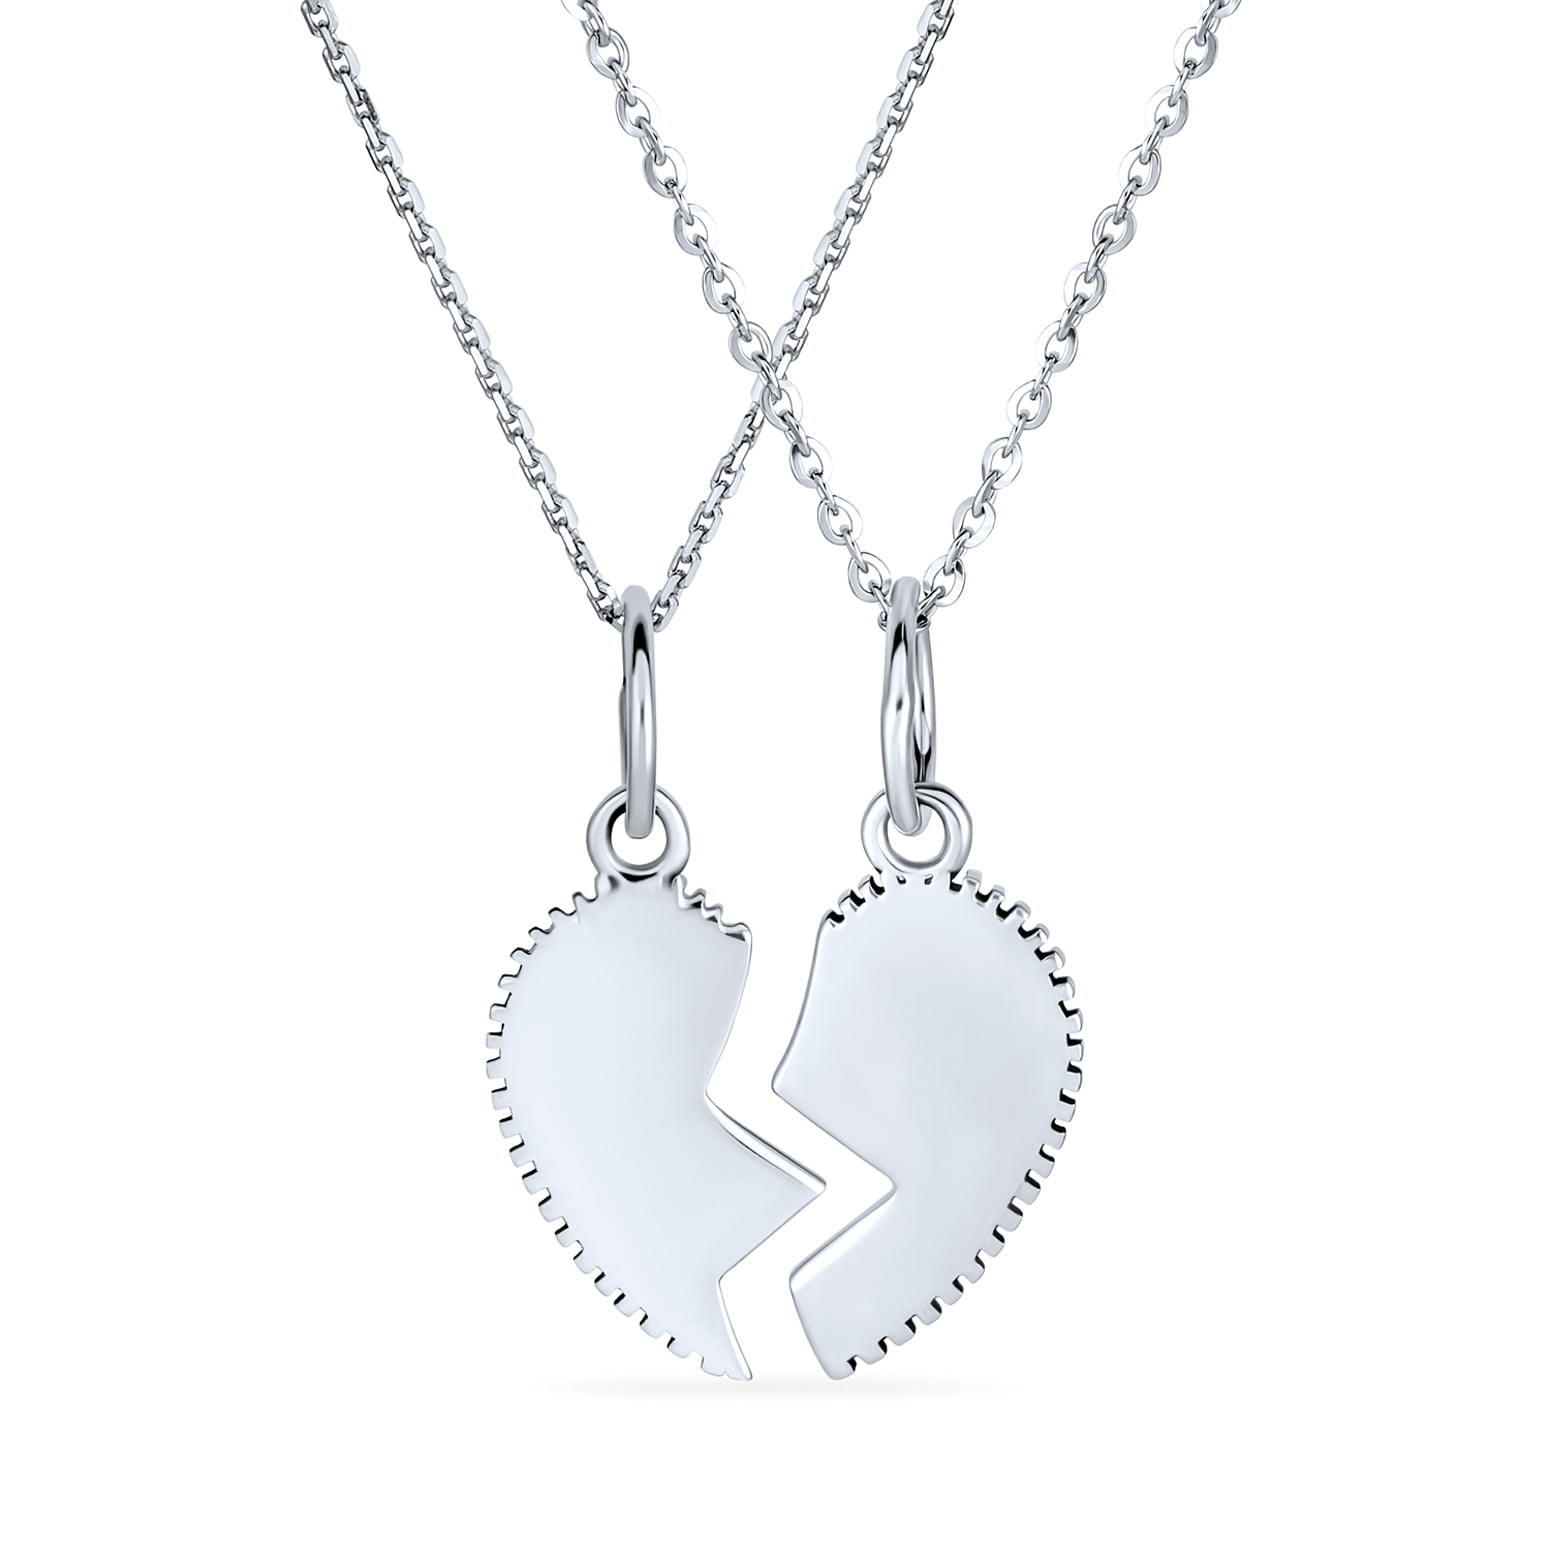 Amazon.com: Luv and Gratitude Aunt Niece Gift, 925 Sterling Silver Necklace,  Christmas Gift for Aunt and Niece, Gift Ideas for Aunt and Niece, Mother's  day gift for aunt (Silver Interlocking) : Handmade